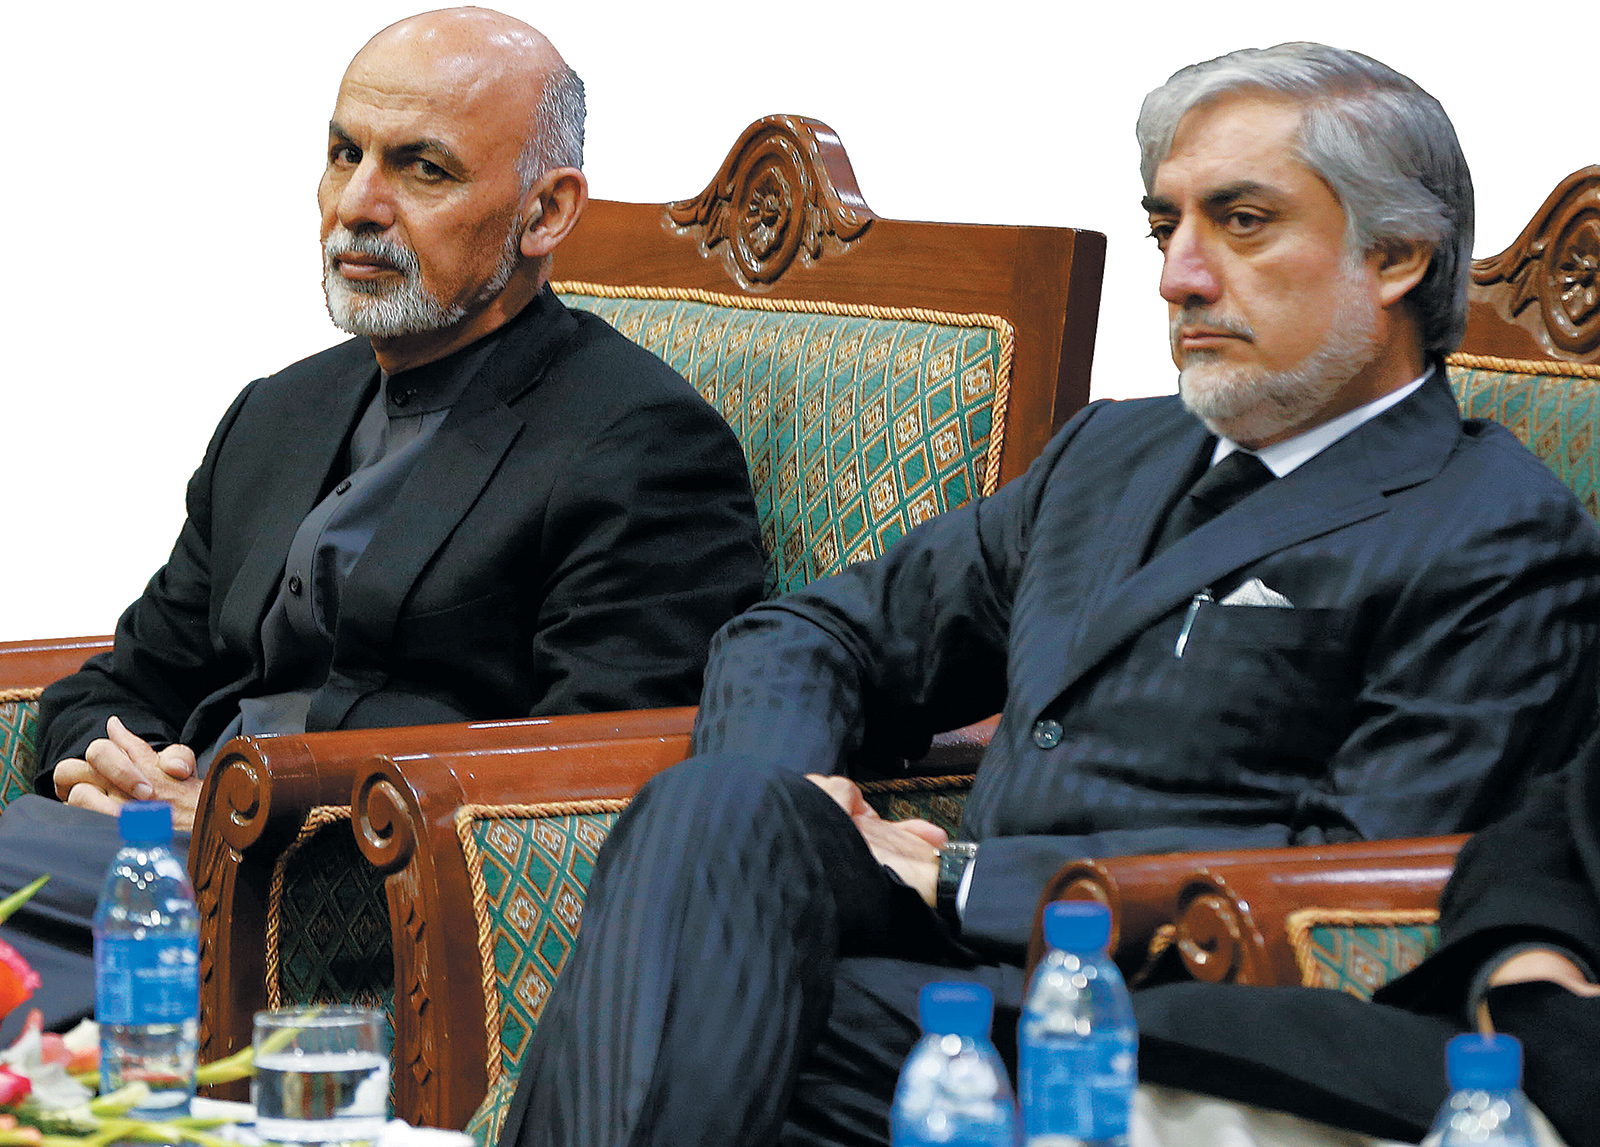 Afghan President Ashraf Ghani and Chief Executive Abdullah Abdullah on the first anniversary of the death of former vice-president Mohammad Qasim Fahim, also known as the ‘marshal of Afghanistan,’ Kabul, March 2015